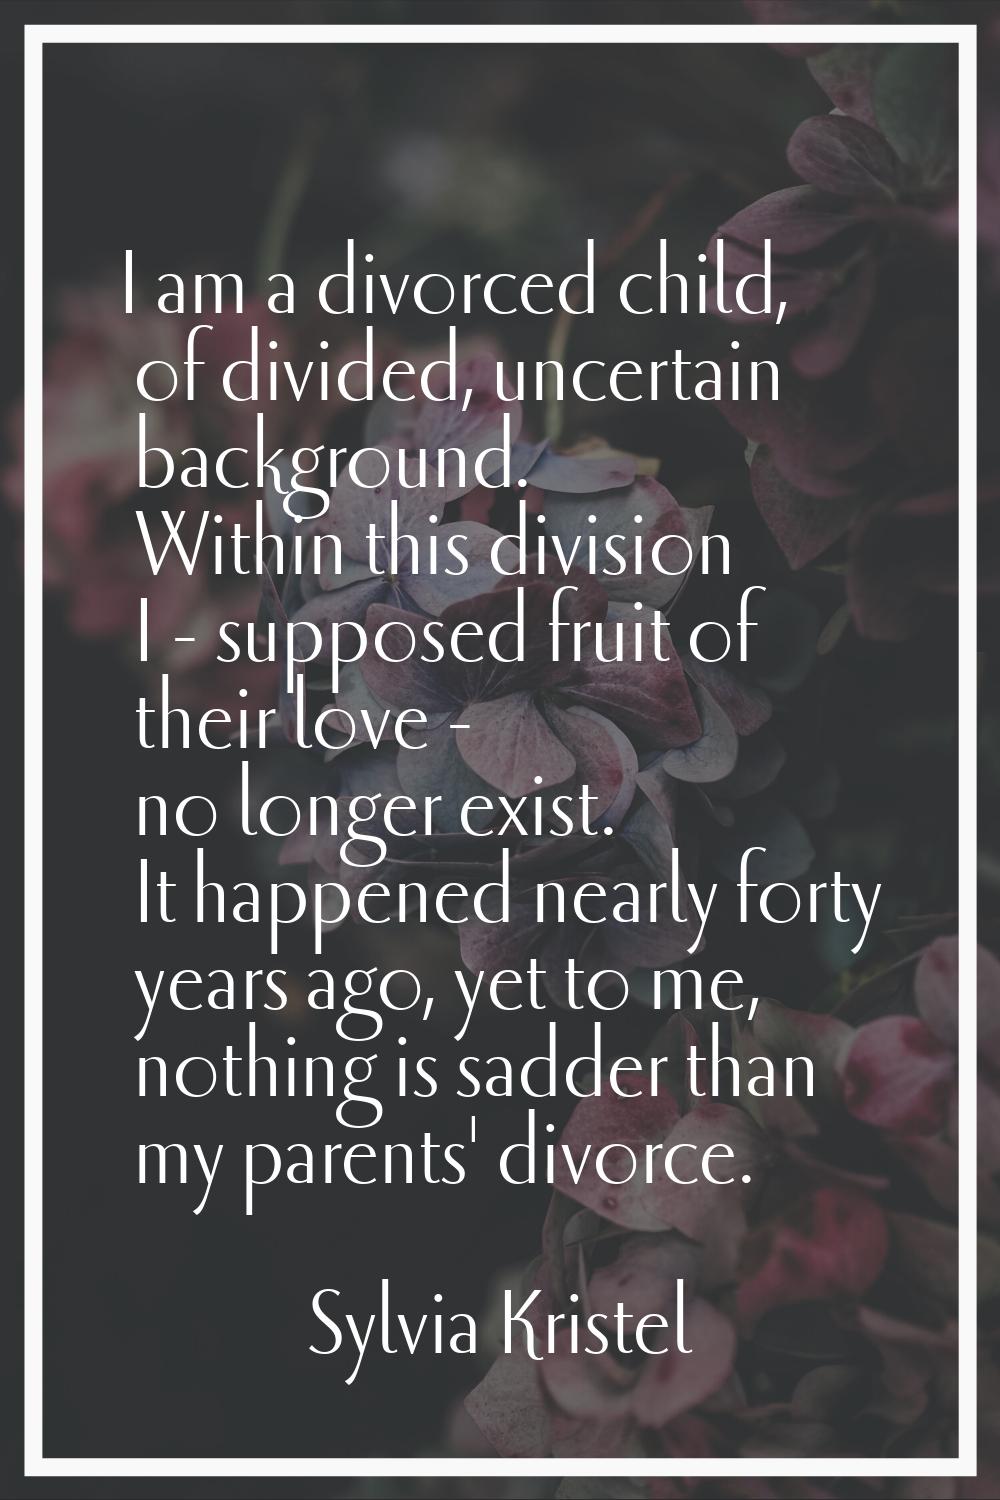 I am a divorced child, of divided, uncertain background. Within this division I - supposed fruit of